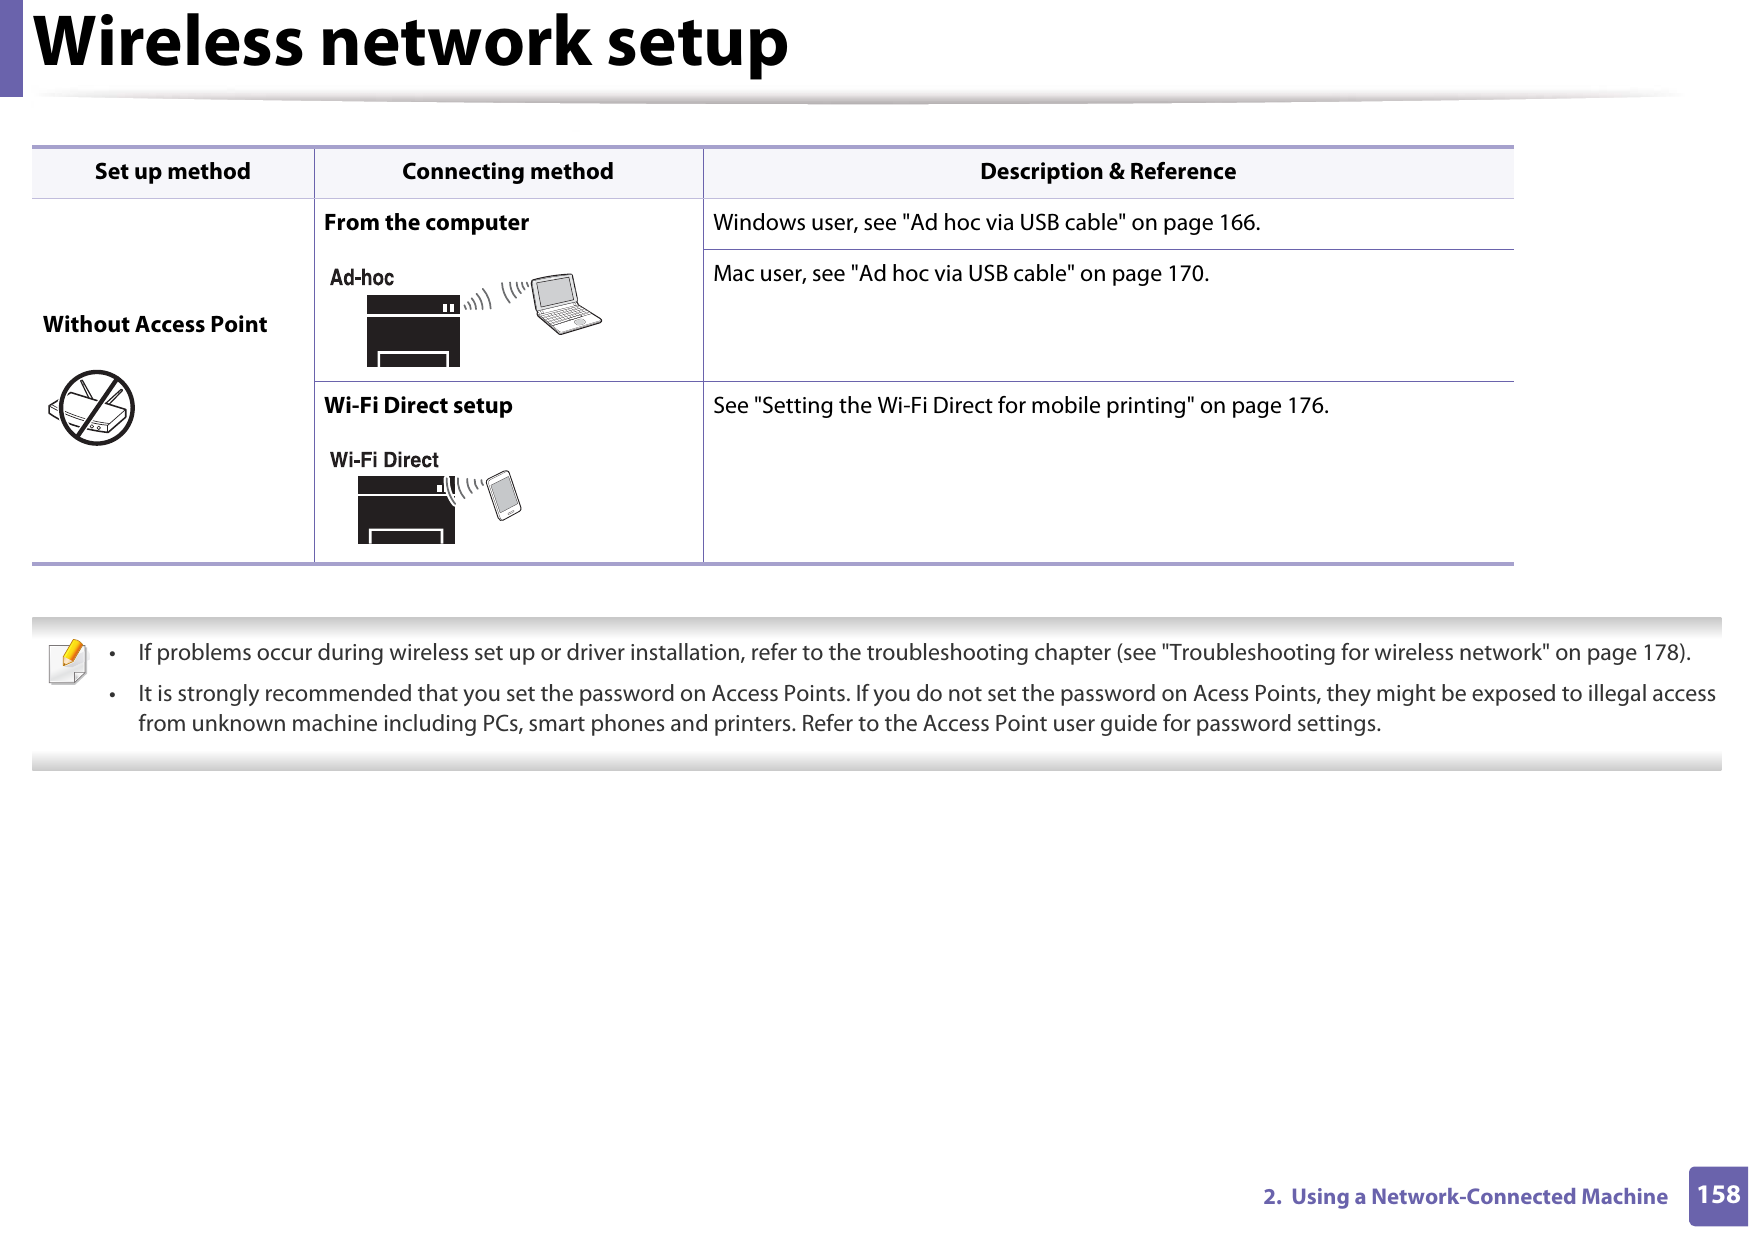 Wireless network setup1582.  Using a Network-Connected Machine  • If problems occur during wireless set up or driver installation, refer to the troubleshooting chapter (see &quot;Troubleshooting for wireless network&quot; on page 178).• It is strongly recommended that you set the password on Access Points. If you do not set the password on Acess Points, they might be exposed to illegal access from unknown machine including PCs, smart phones and printers. Refer to the Access Point user guide for password settings. Without Access PointFrom the computer Windows user, see &quot;Ad hoc via USB cable&quot; on page 166.Mac user, see &quot;Ad hoc via USB cable&quot; on page 170.Wi-Fi Direct setup See &quot;Setting the Wi-Fi Direct for mobile printing&quot; on page 176.Set up method Connecting method Description &amp; Reference